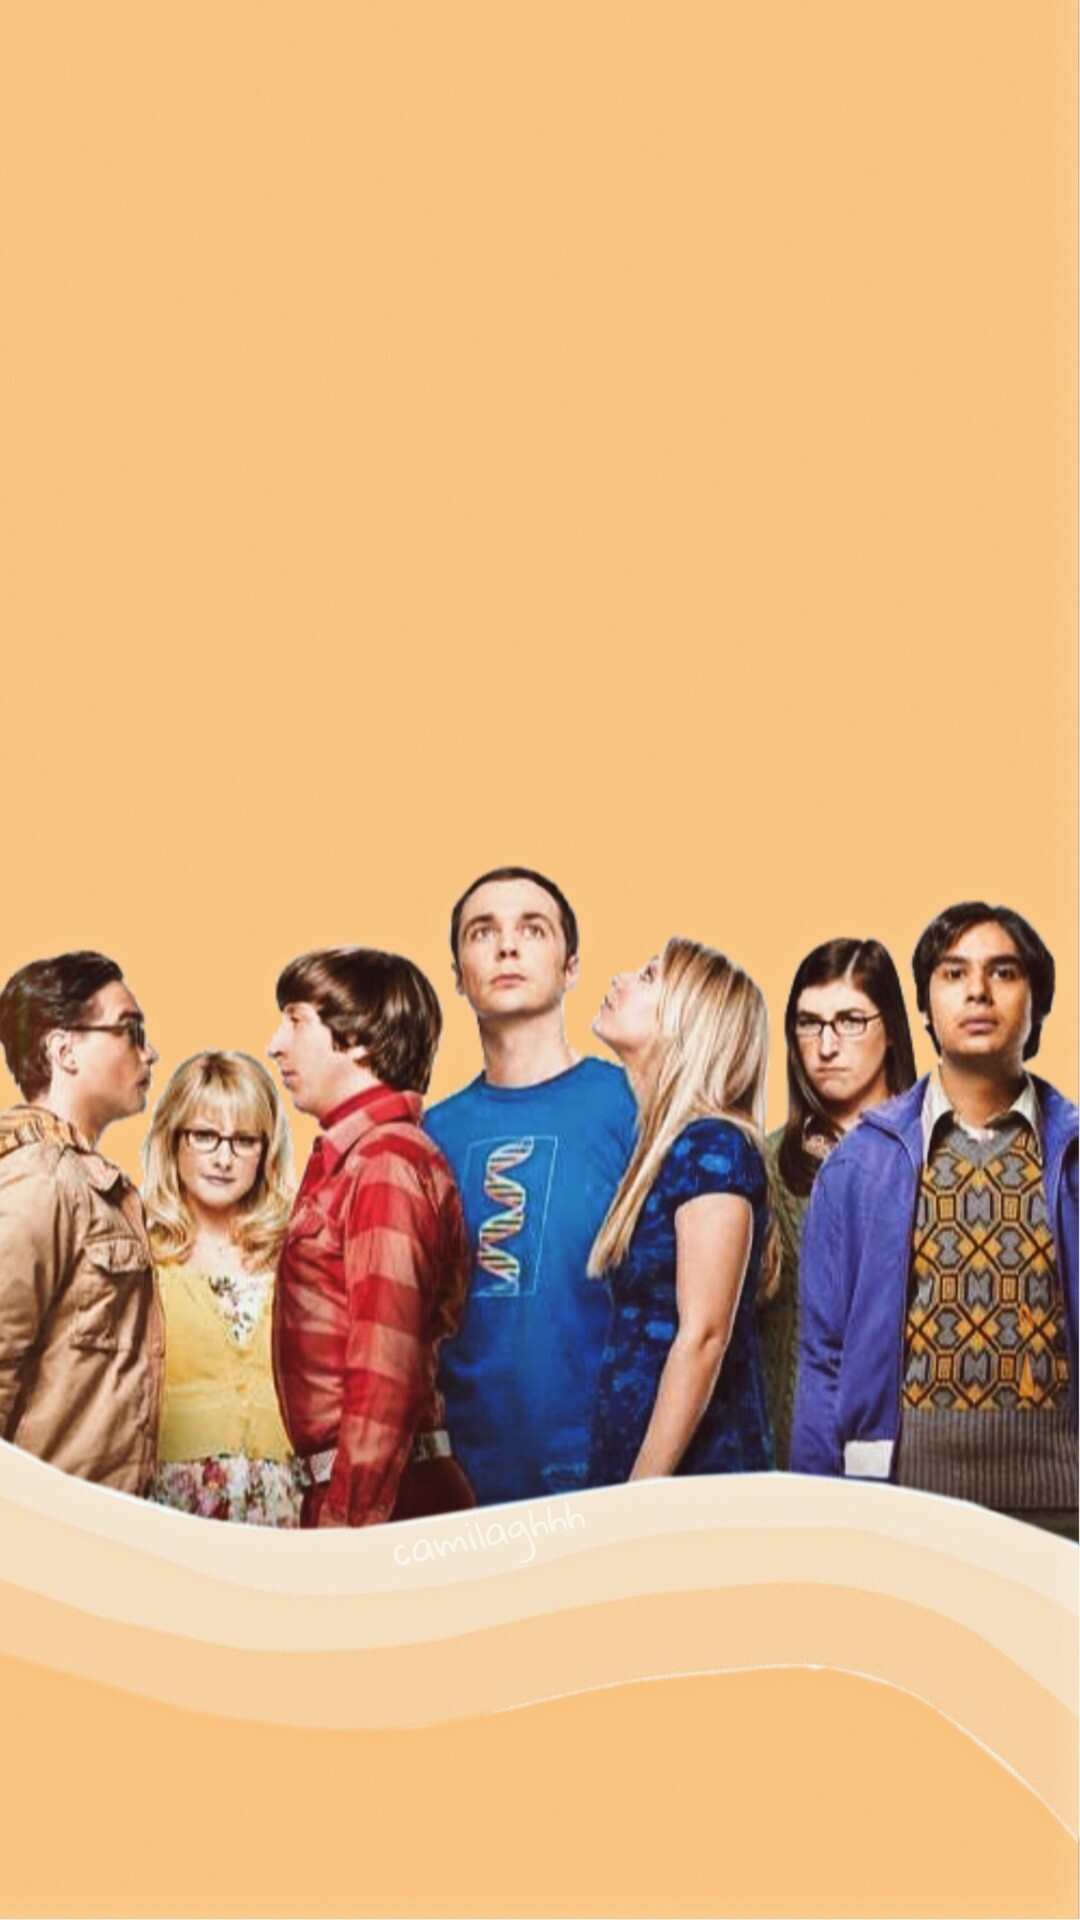 The Big Bang Theory: Penny guides the boys with invaluable lessons about social interactions with women, while they teach her about video games and comic books. 1080x1920 Full HD Wallpaper.